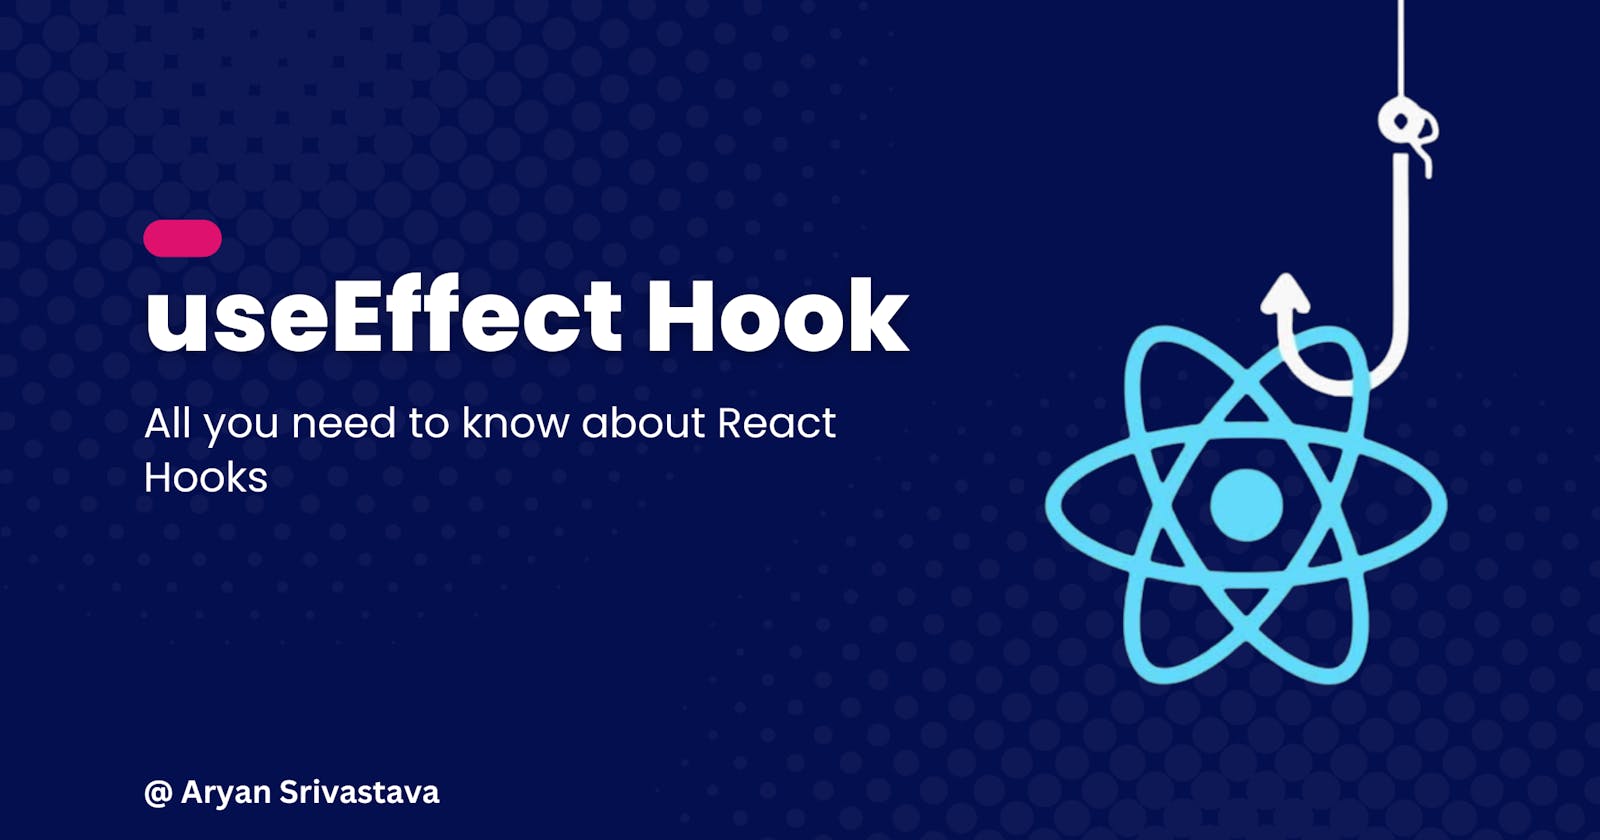 All you need to know about React Hooks: useEffect